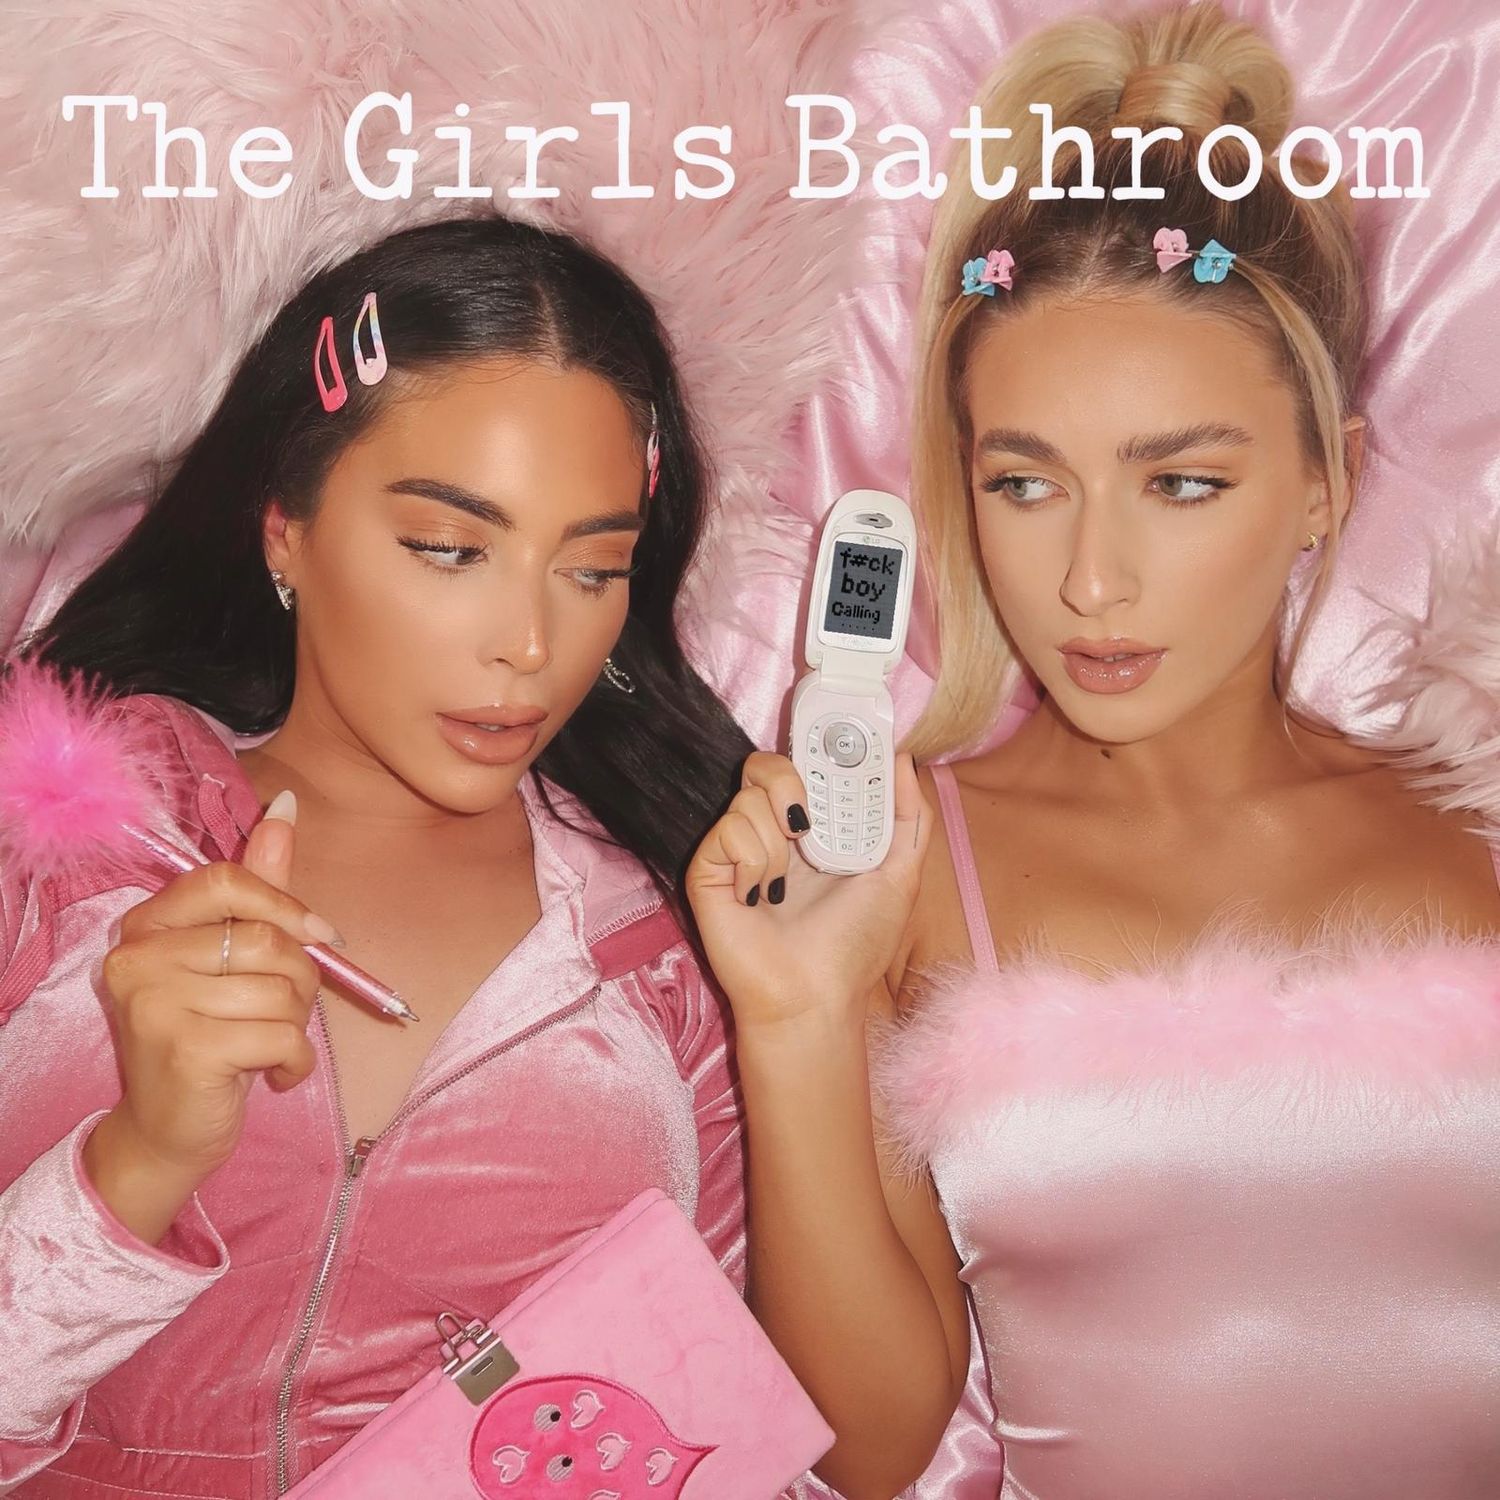 The Girls Bathroom Planet Tour in der O2 City Hall Newcastle Tickets